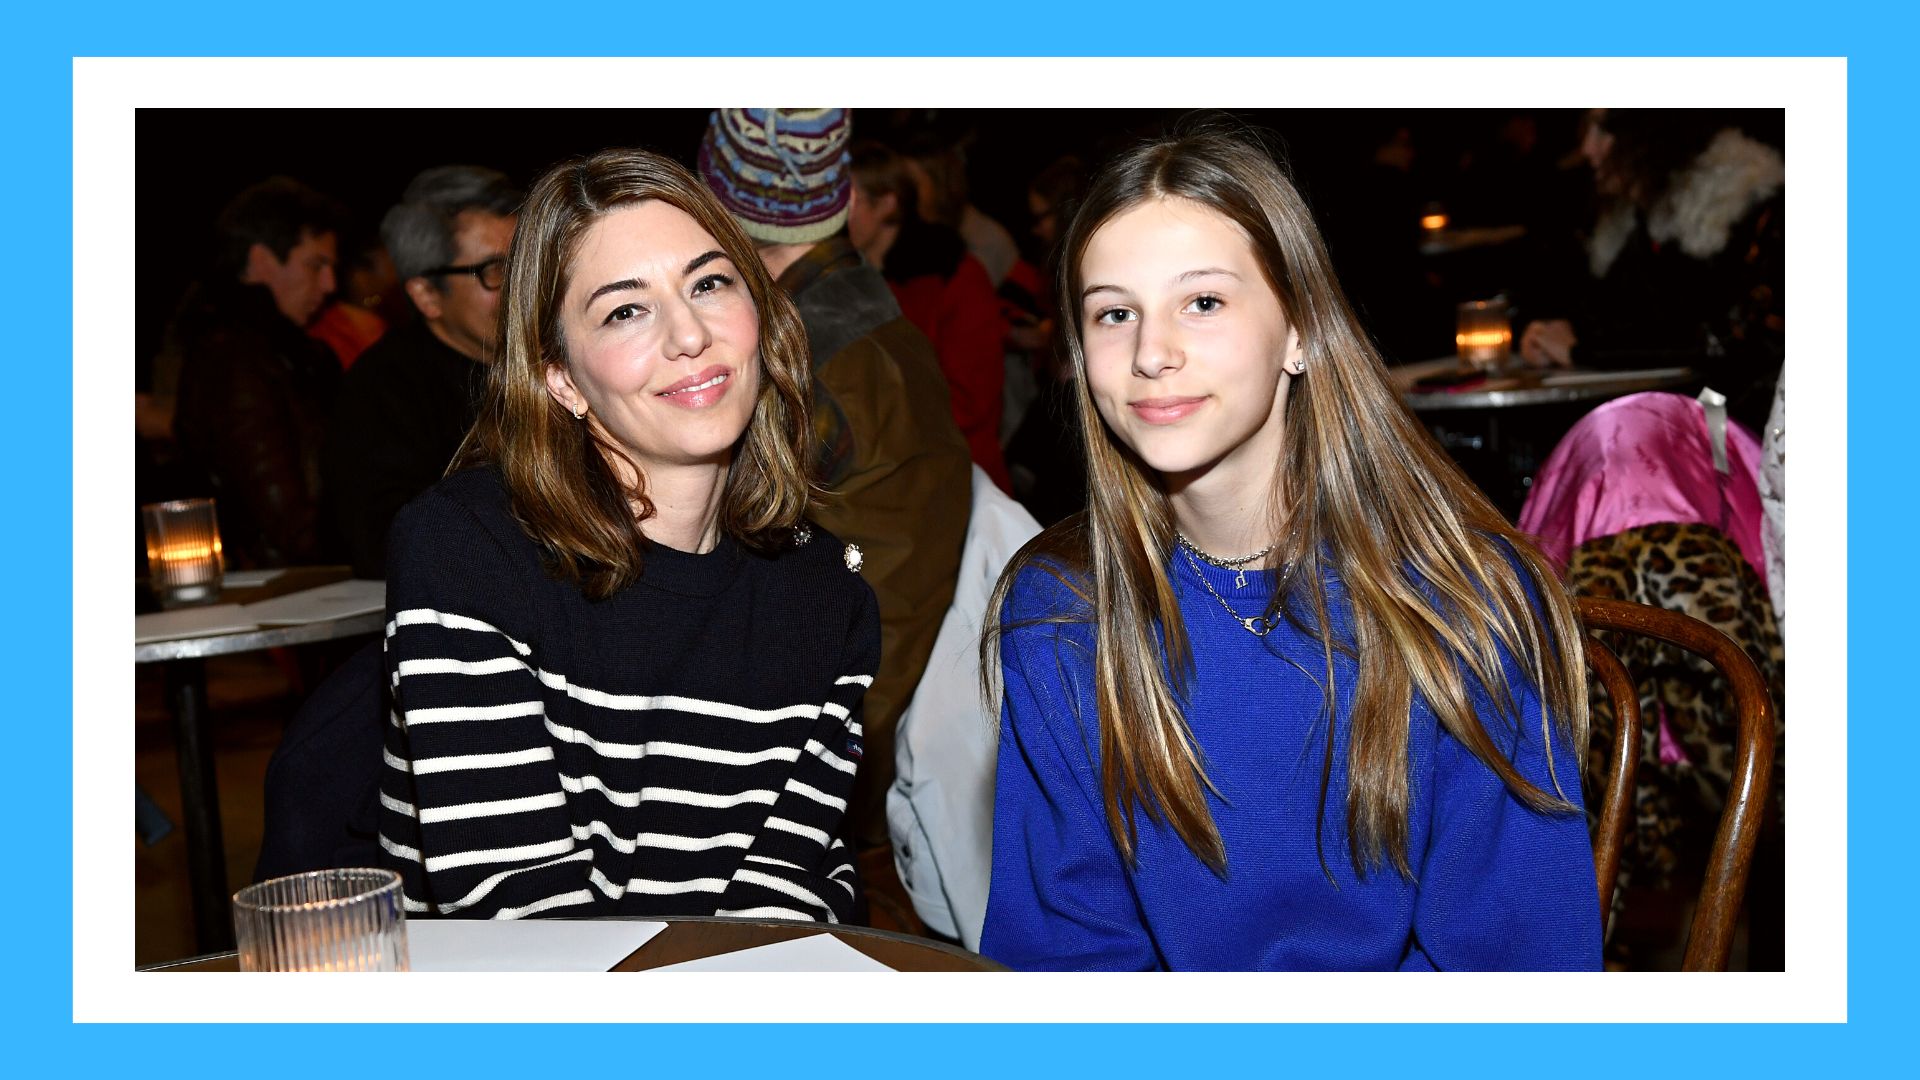 Actress SOFIA COPPOLA, daughter of Francis Ford Coppola arrives